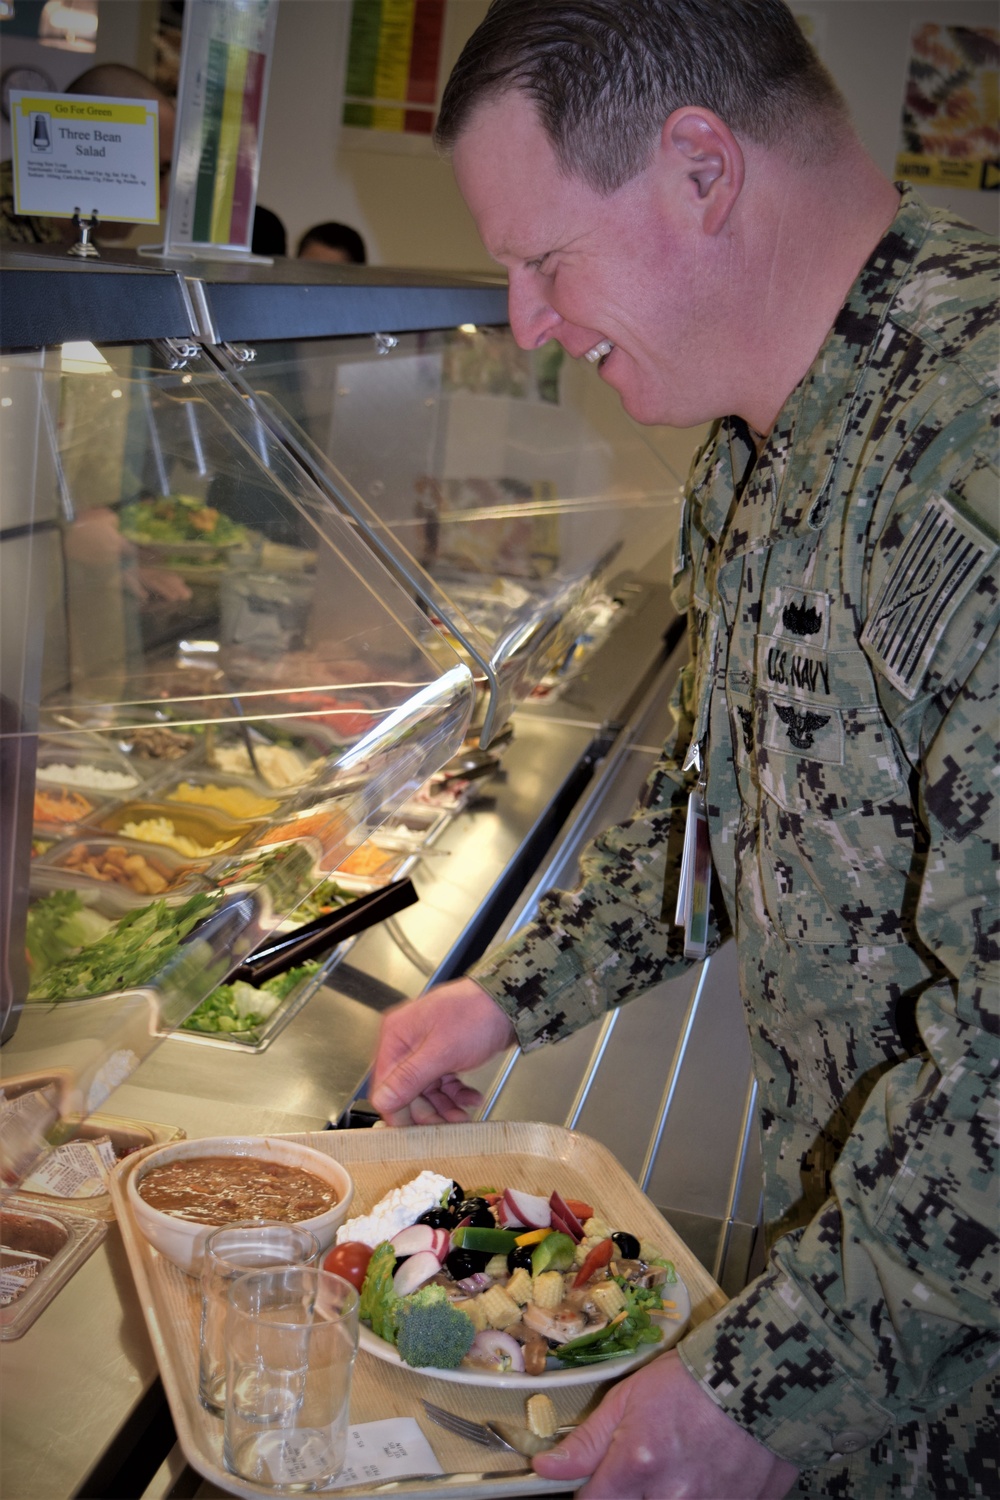 National Nutrition Month provides Food for Thought at Naval Hospital Bremerton